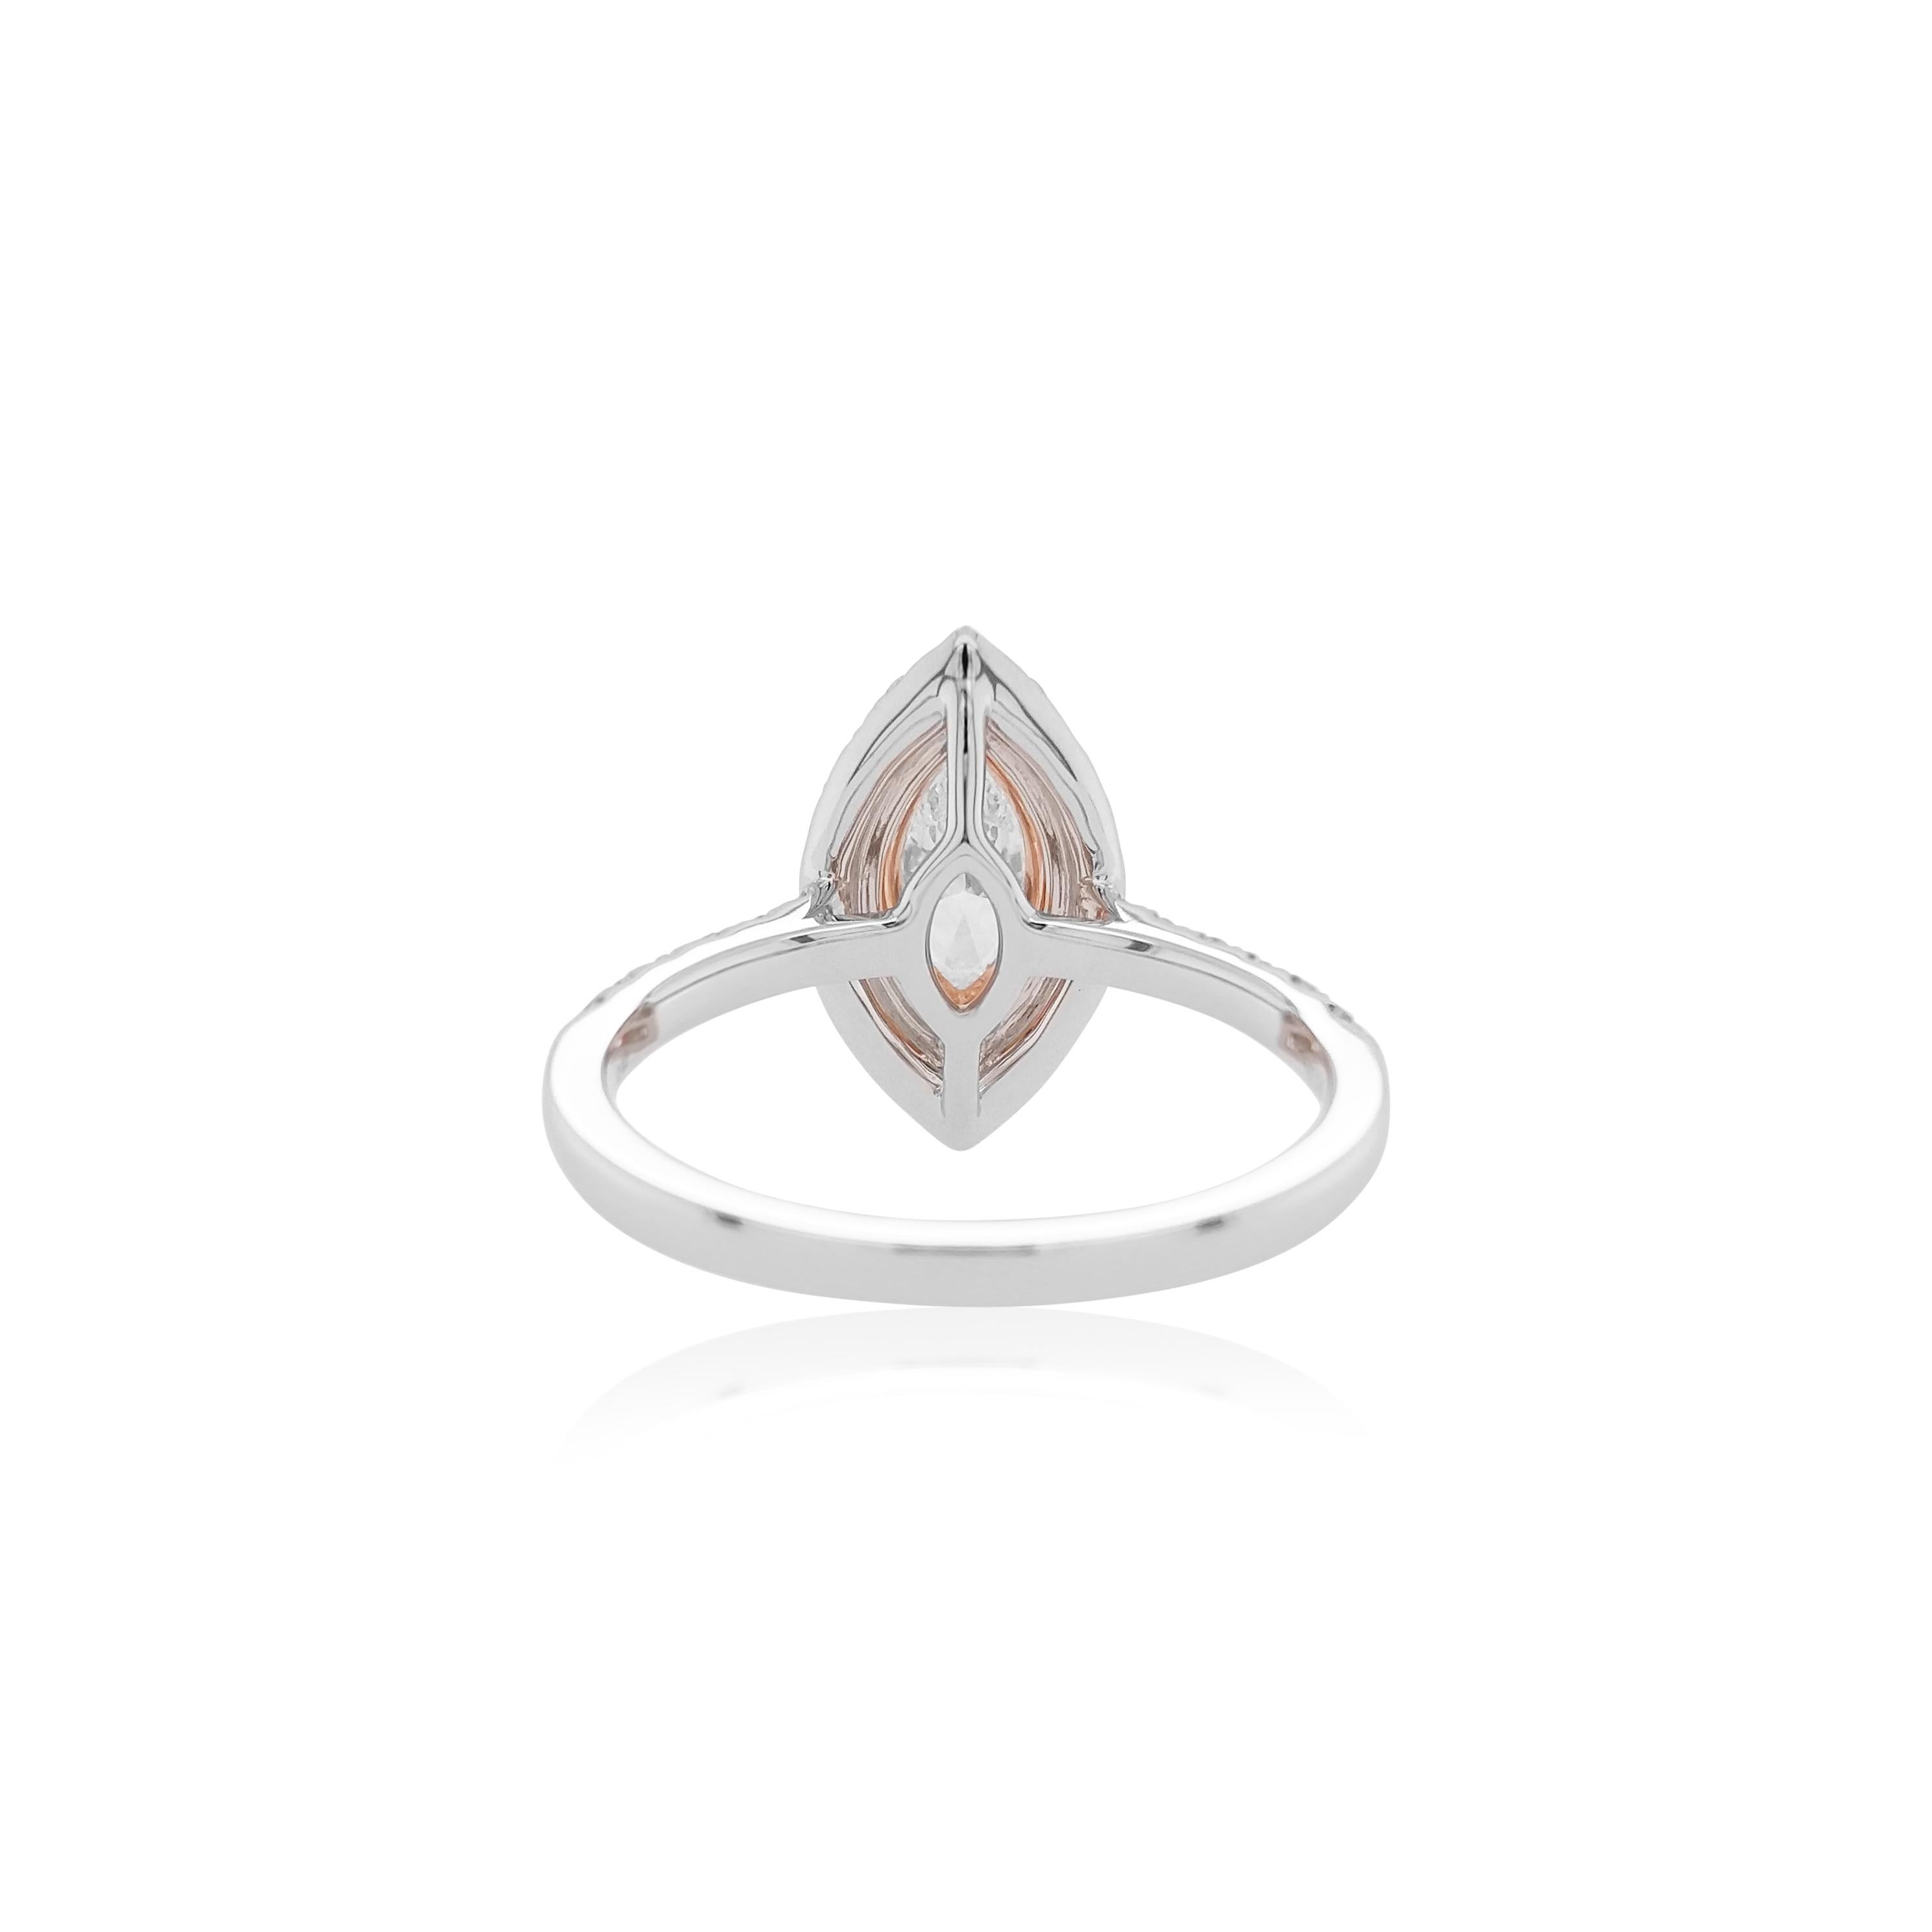 This striking 18K gold ring features an exceptional quality Marquise-shape White Diamond at its centre, surrounded by subtle halos of natural Argyle Pink Diamonds and stunning White Diamonds. Set in 18 Karat White and Pink gold to provide a unique